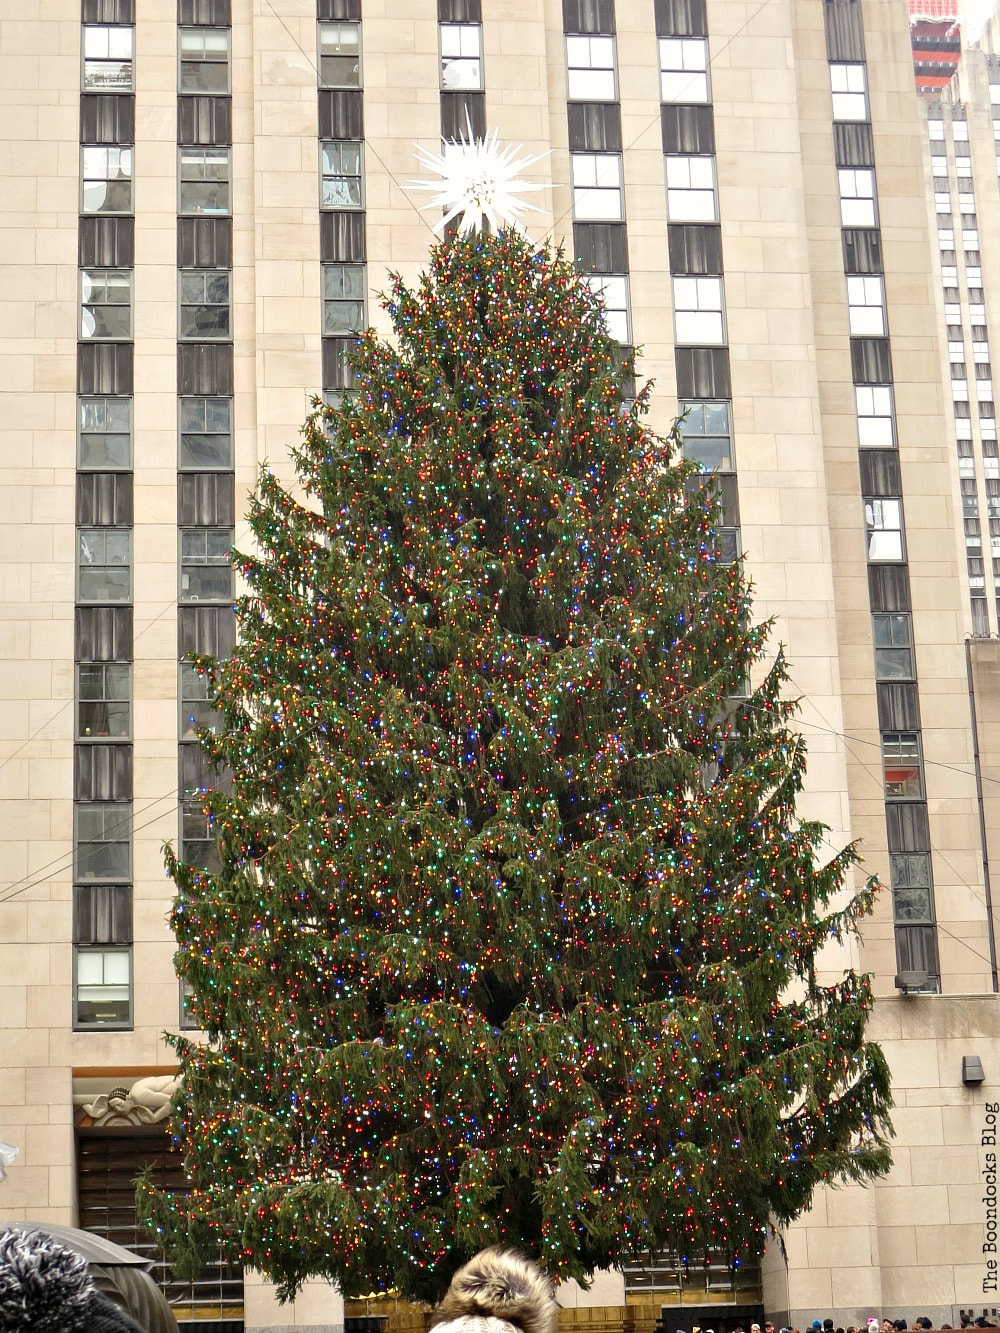 The Christmas tree which is 72 feet tall, A Visit to the Spectacular Tree at Rockefeller Center www.theboondocksblog.com